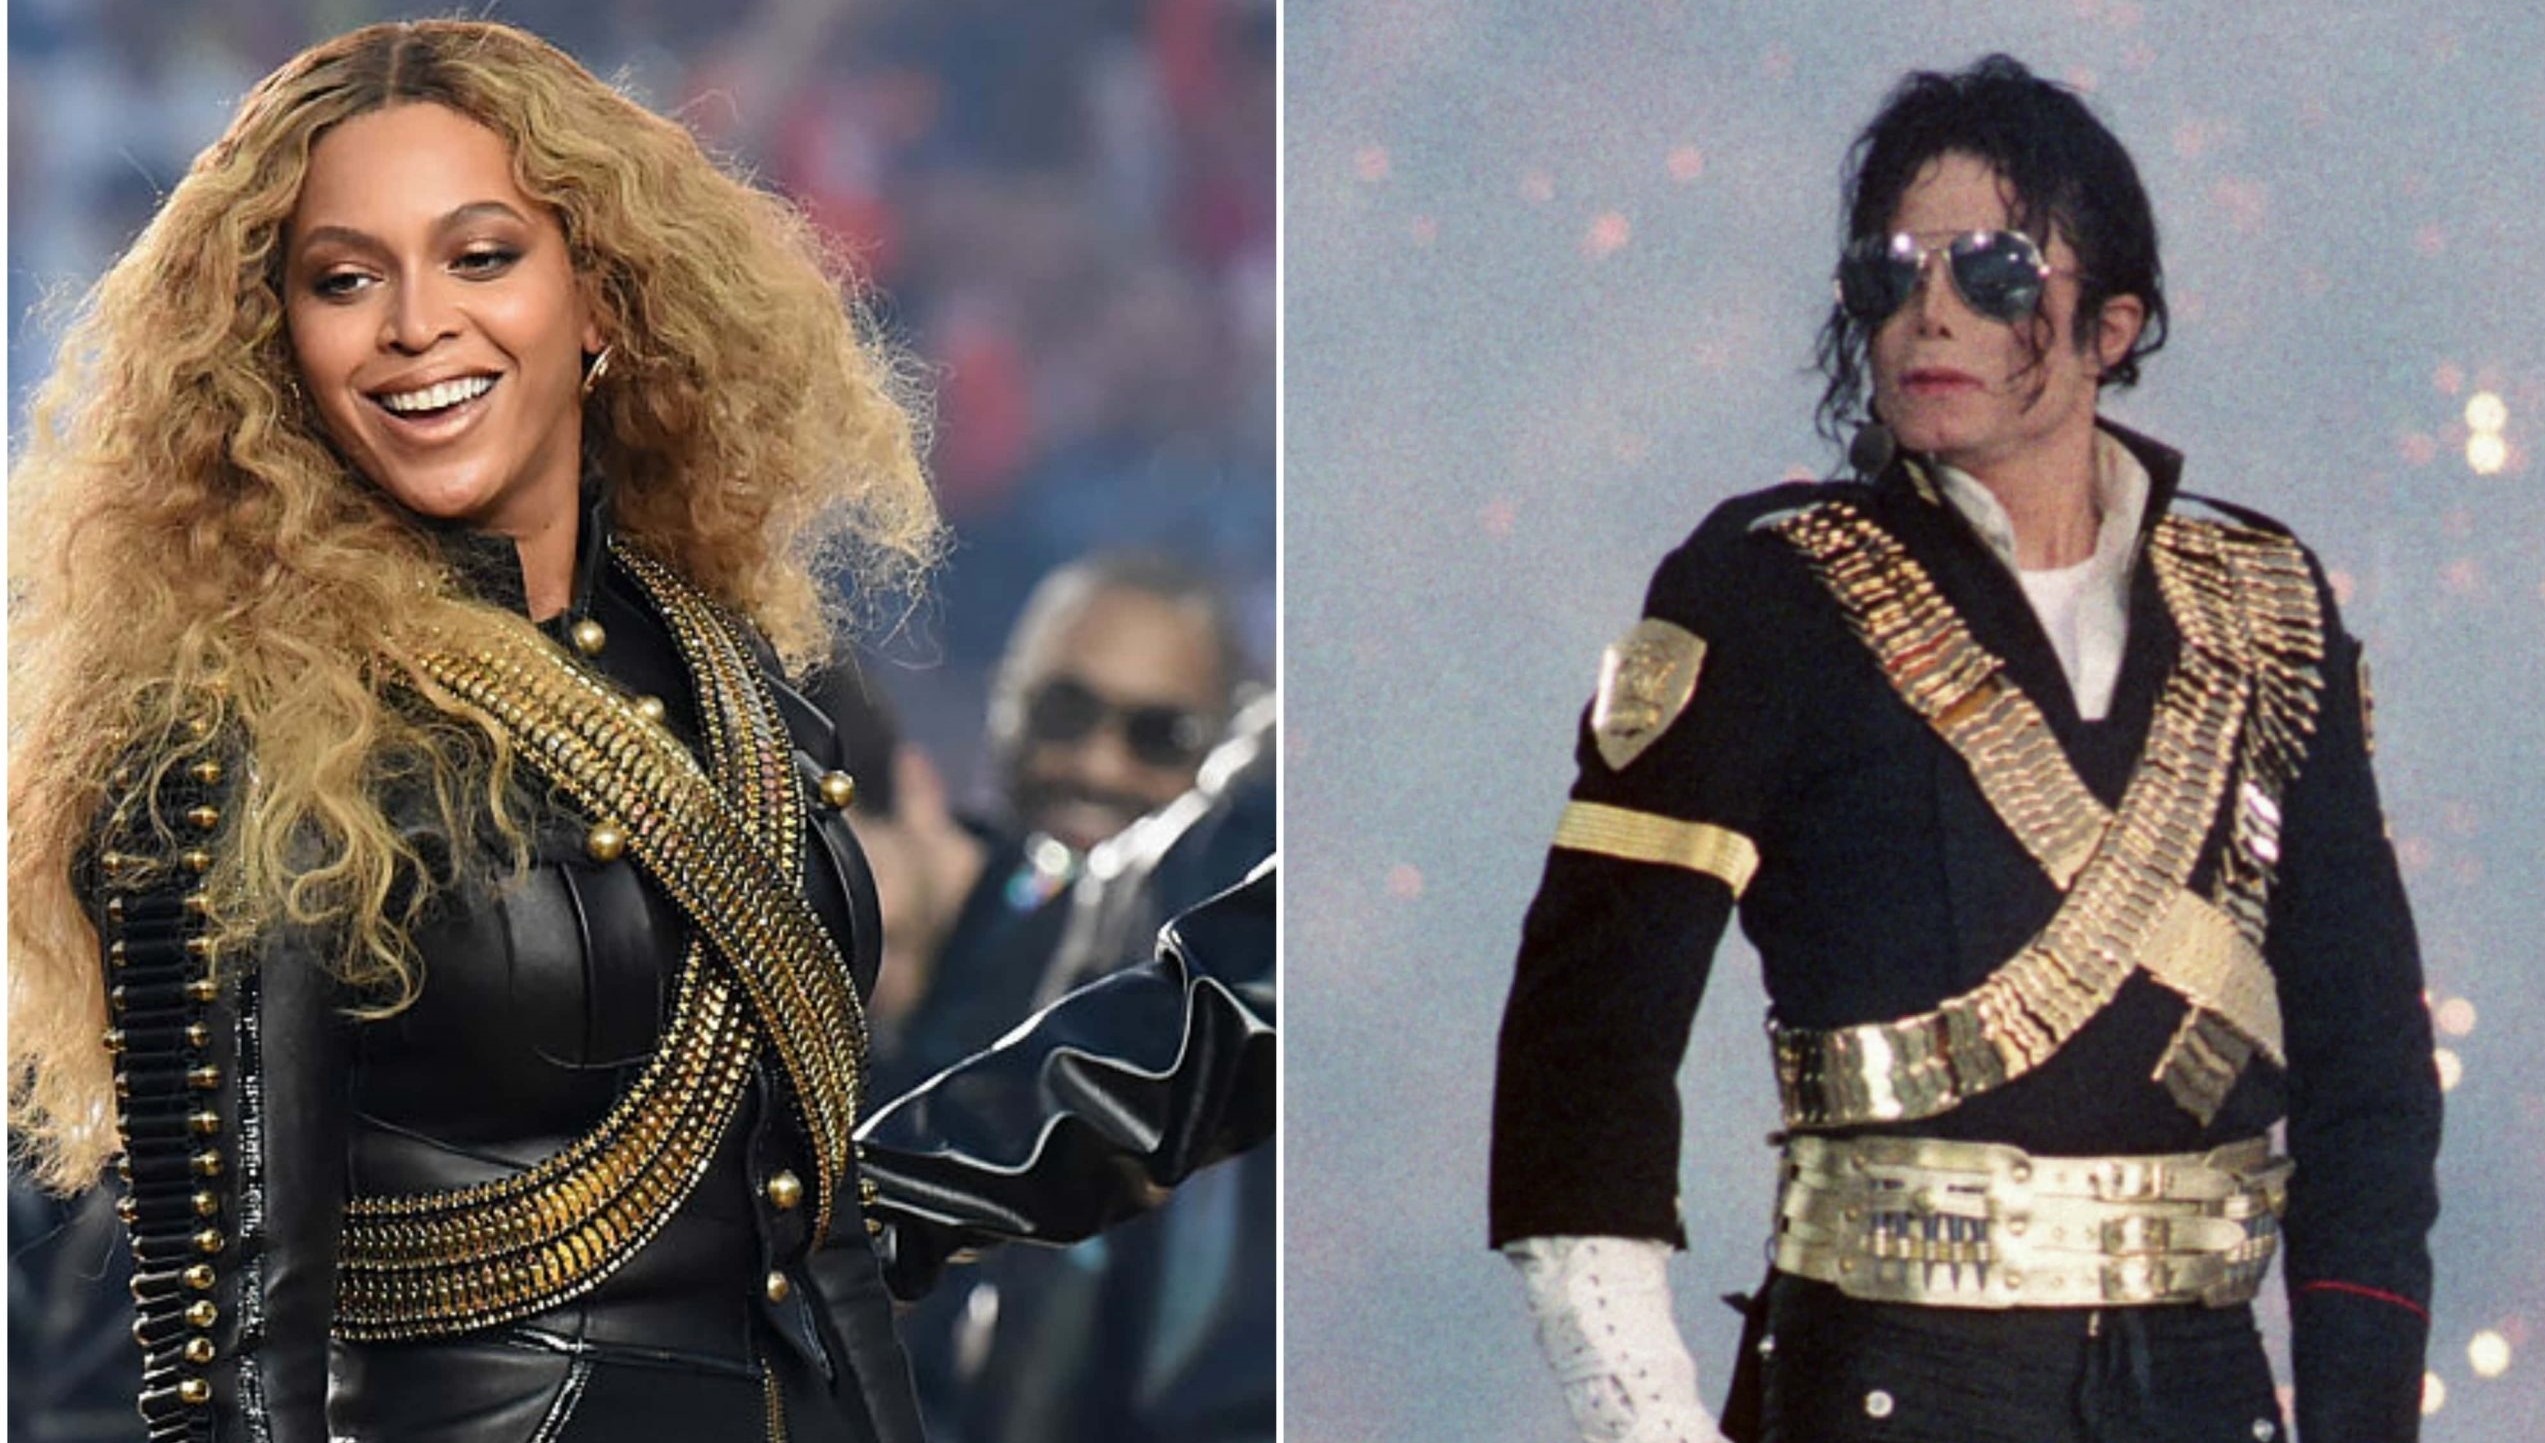 Jay-Z compares his wife Beyonce to Michael Jackson and the twitter-verse goes crazy